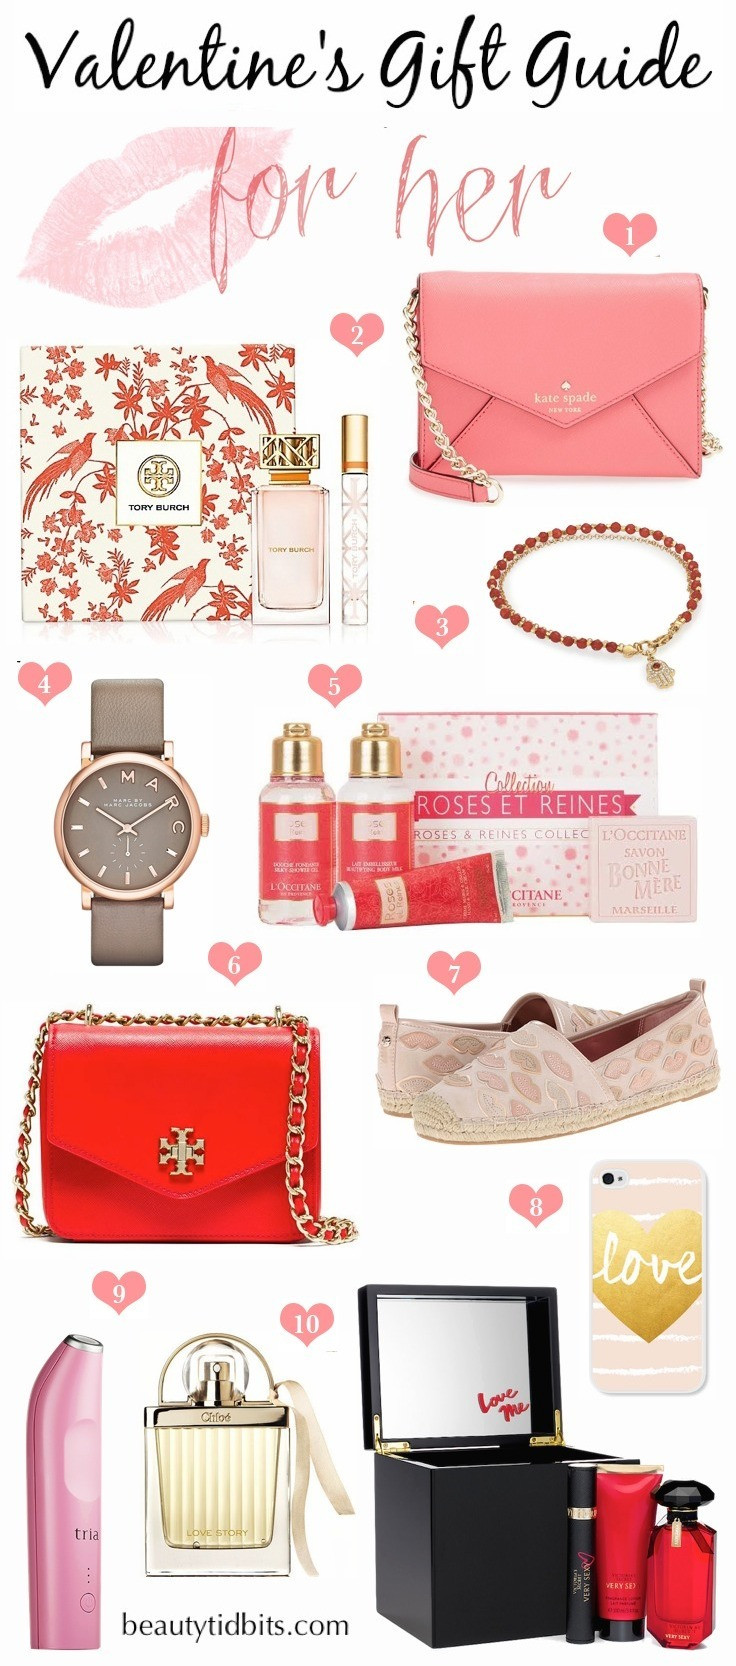 Valentine'S Day Gift Ideas For Her
 Valentine s Day Gift Guide For Her